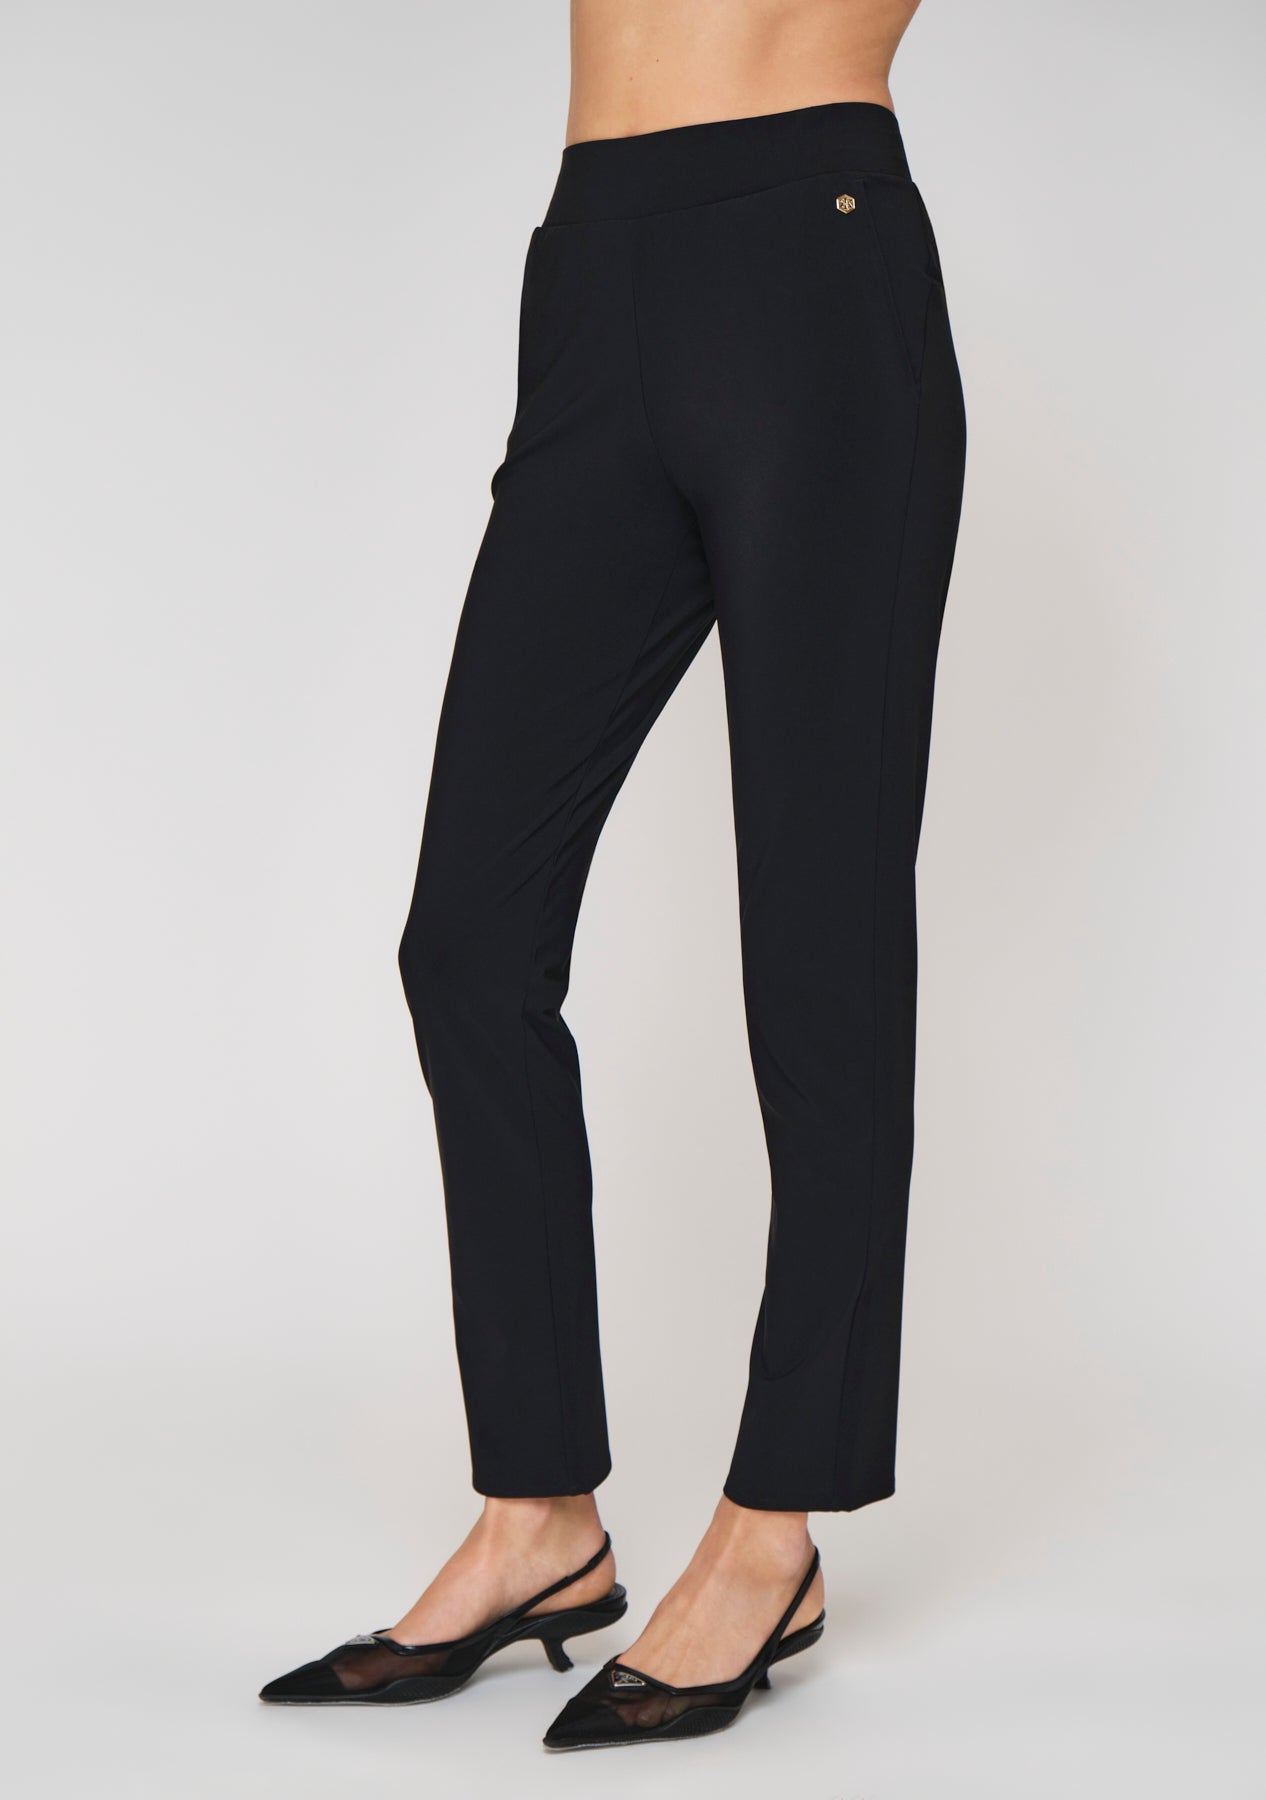 Greg Norman Women's Essential Pull-On Stretch Pants - Worldwide Golf Shops